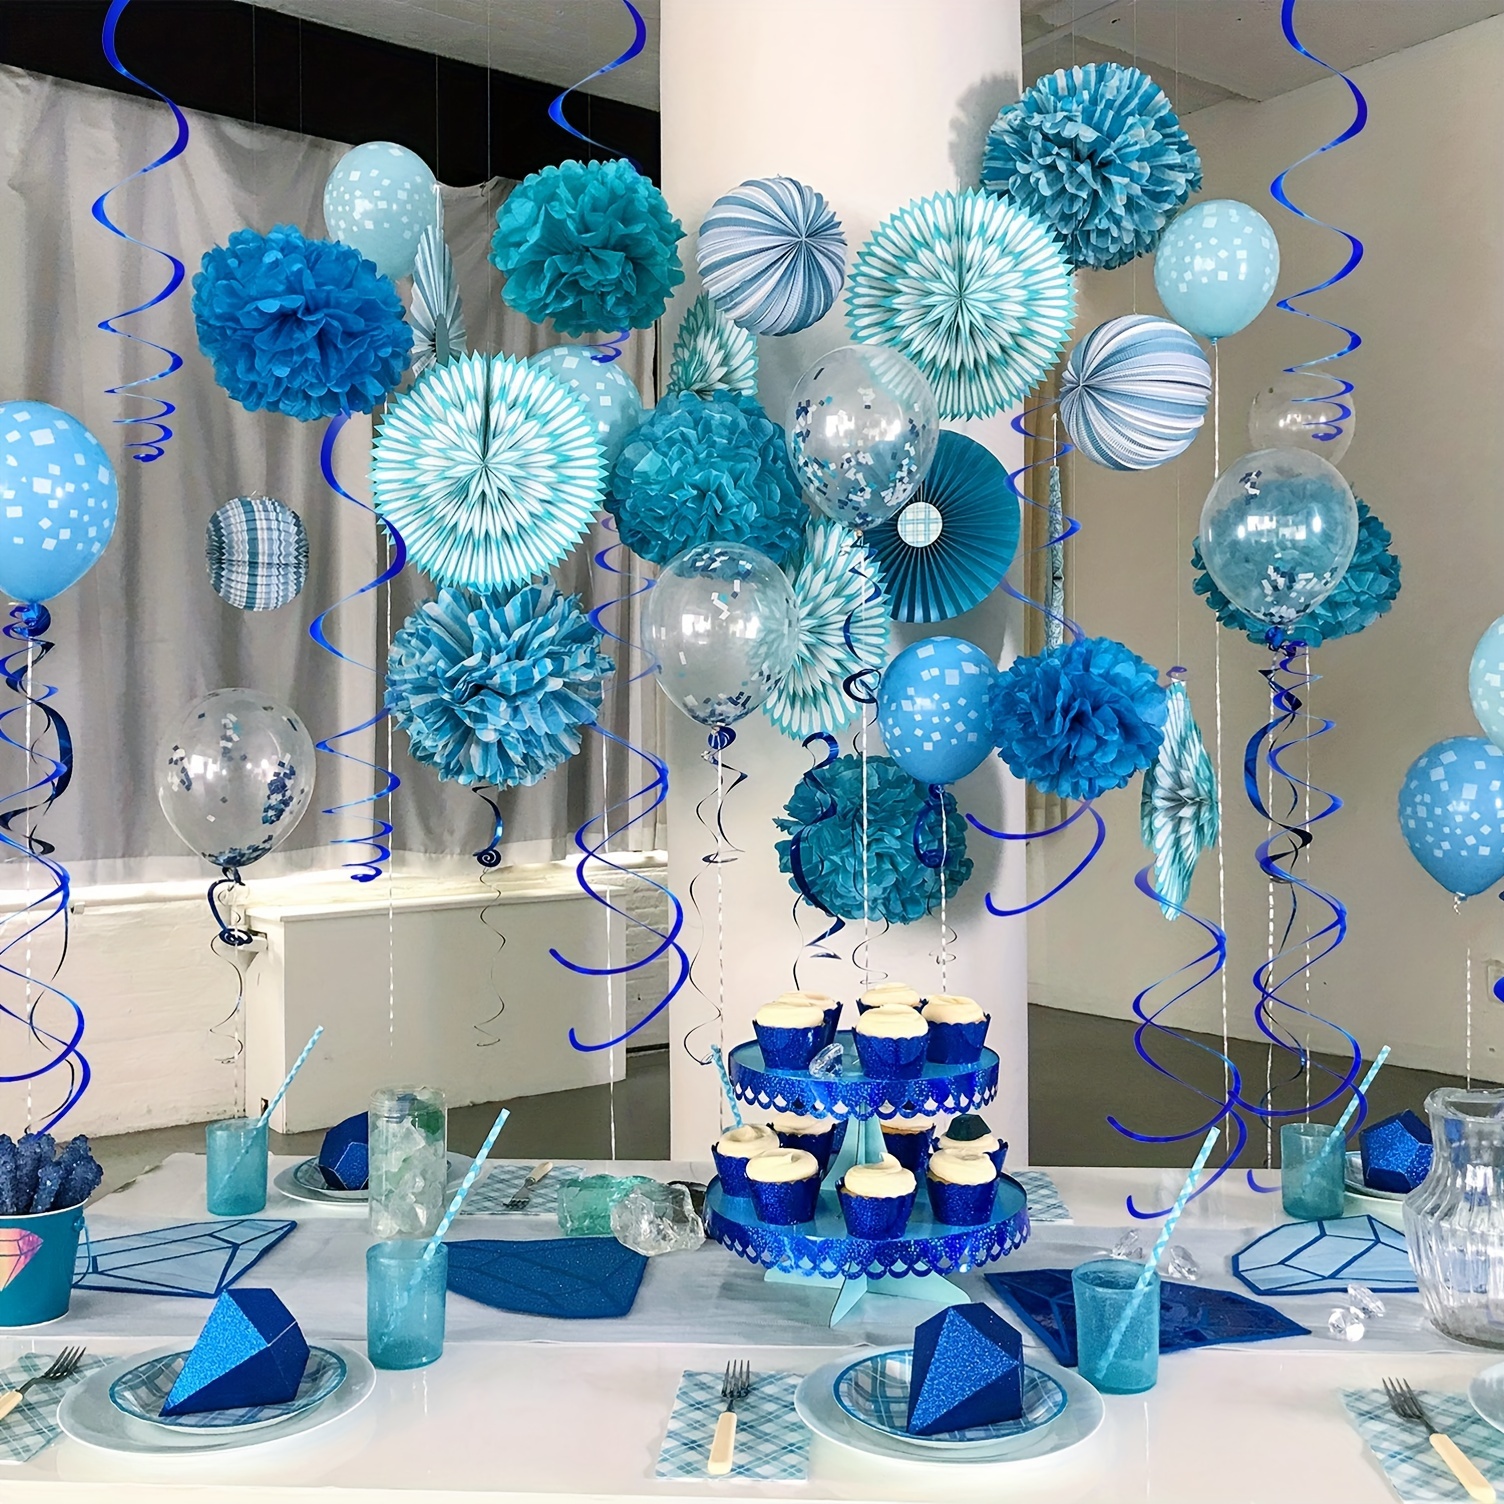  White Blue Streamers Party Decorations,Crepe Paper Streamers  8Rolls with Tinsel Curtain Party Backdrop Glitter,White and Blue Streamers  in 4 Pastel Colors for Birthday,Photo Booth Party,Wedding : Home & Kitchen